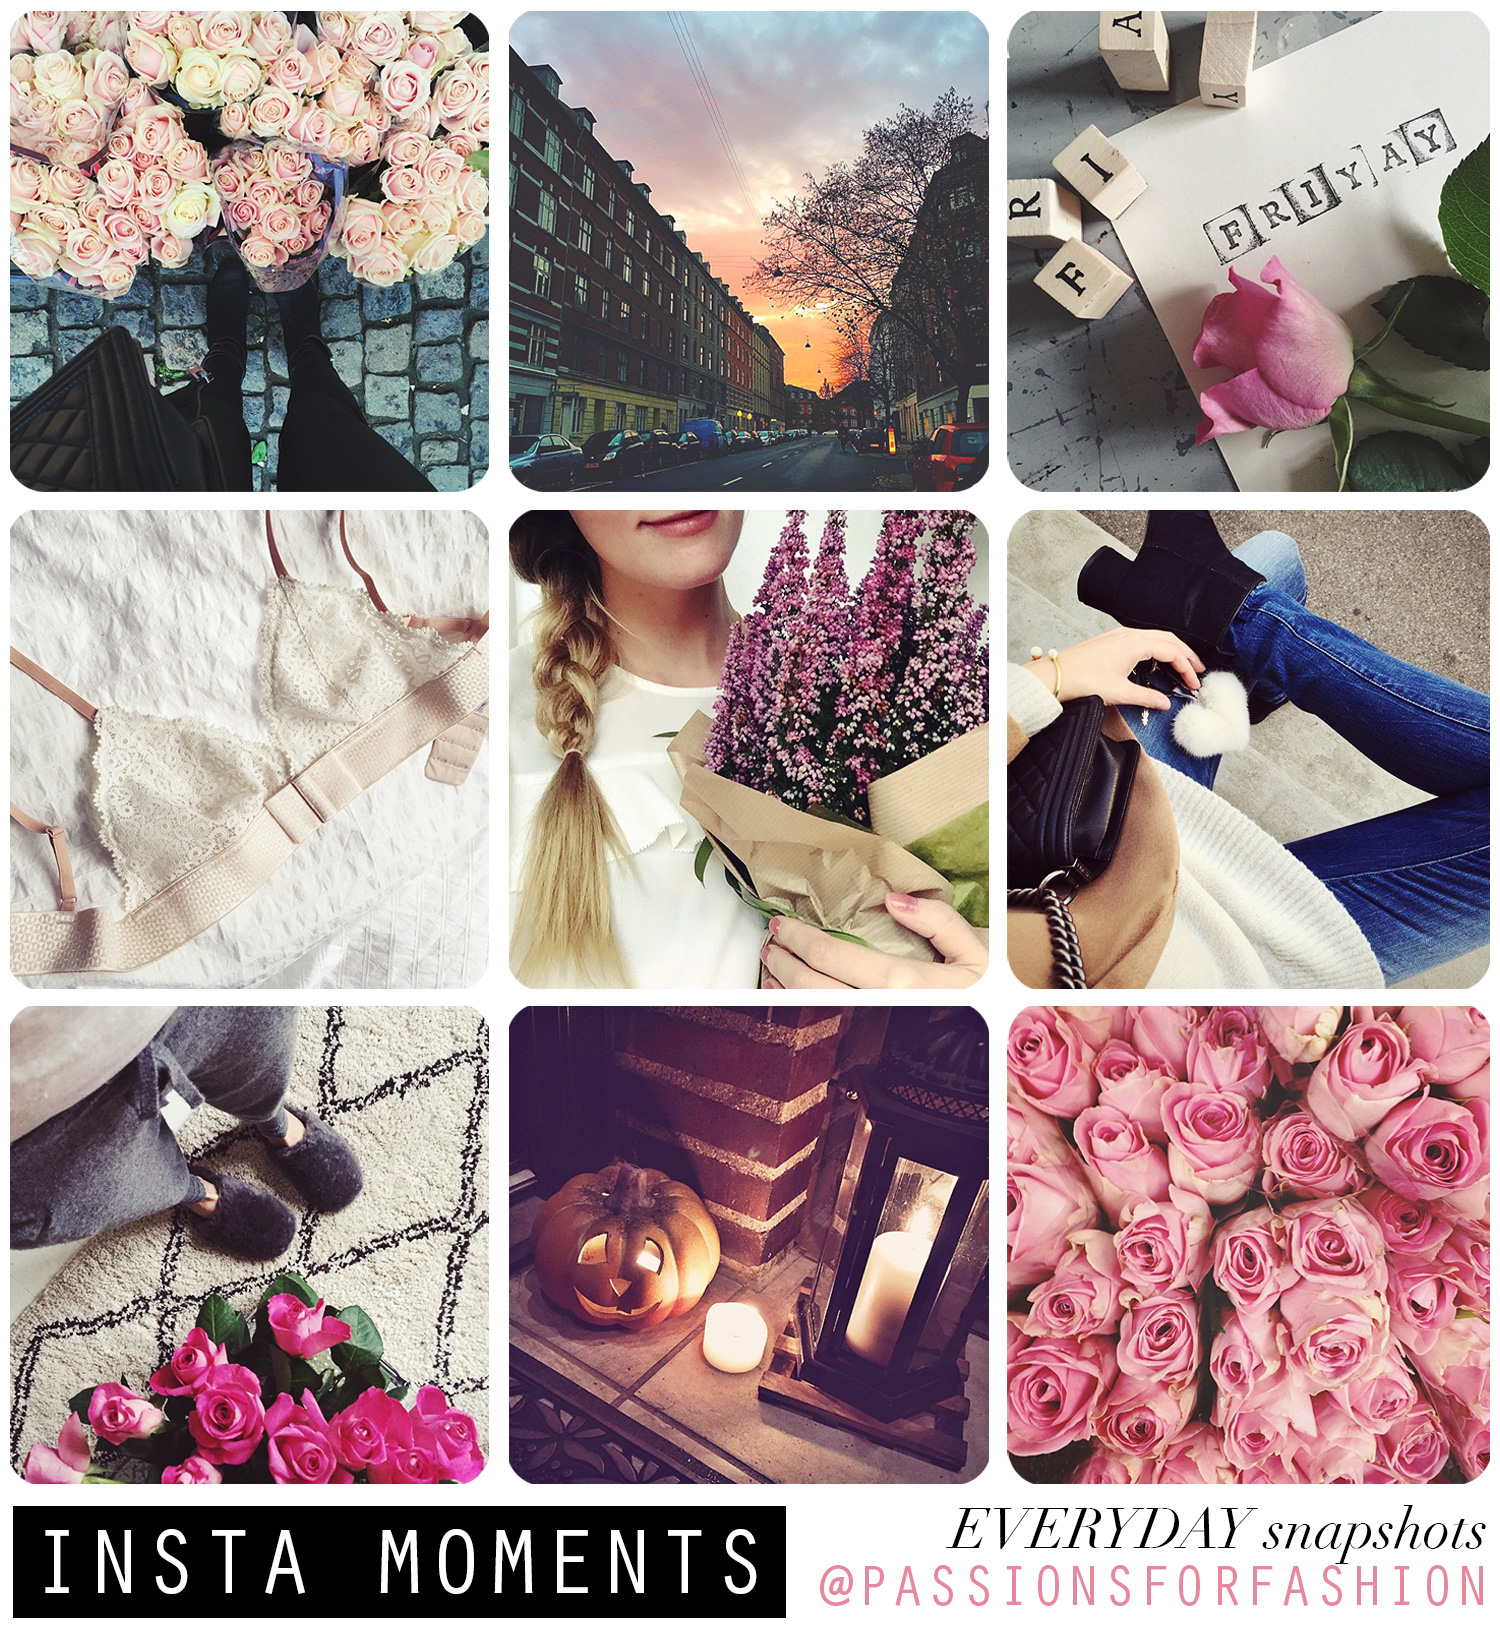 instagram-passions-for-fashion@2x